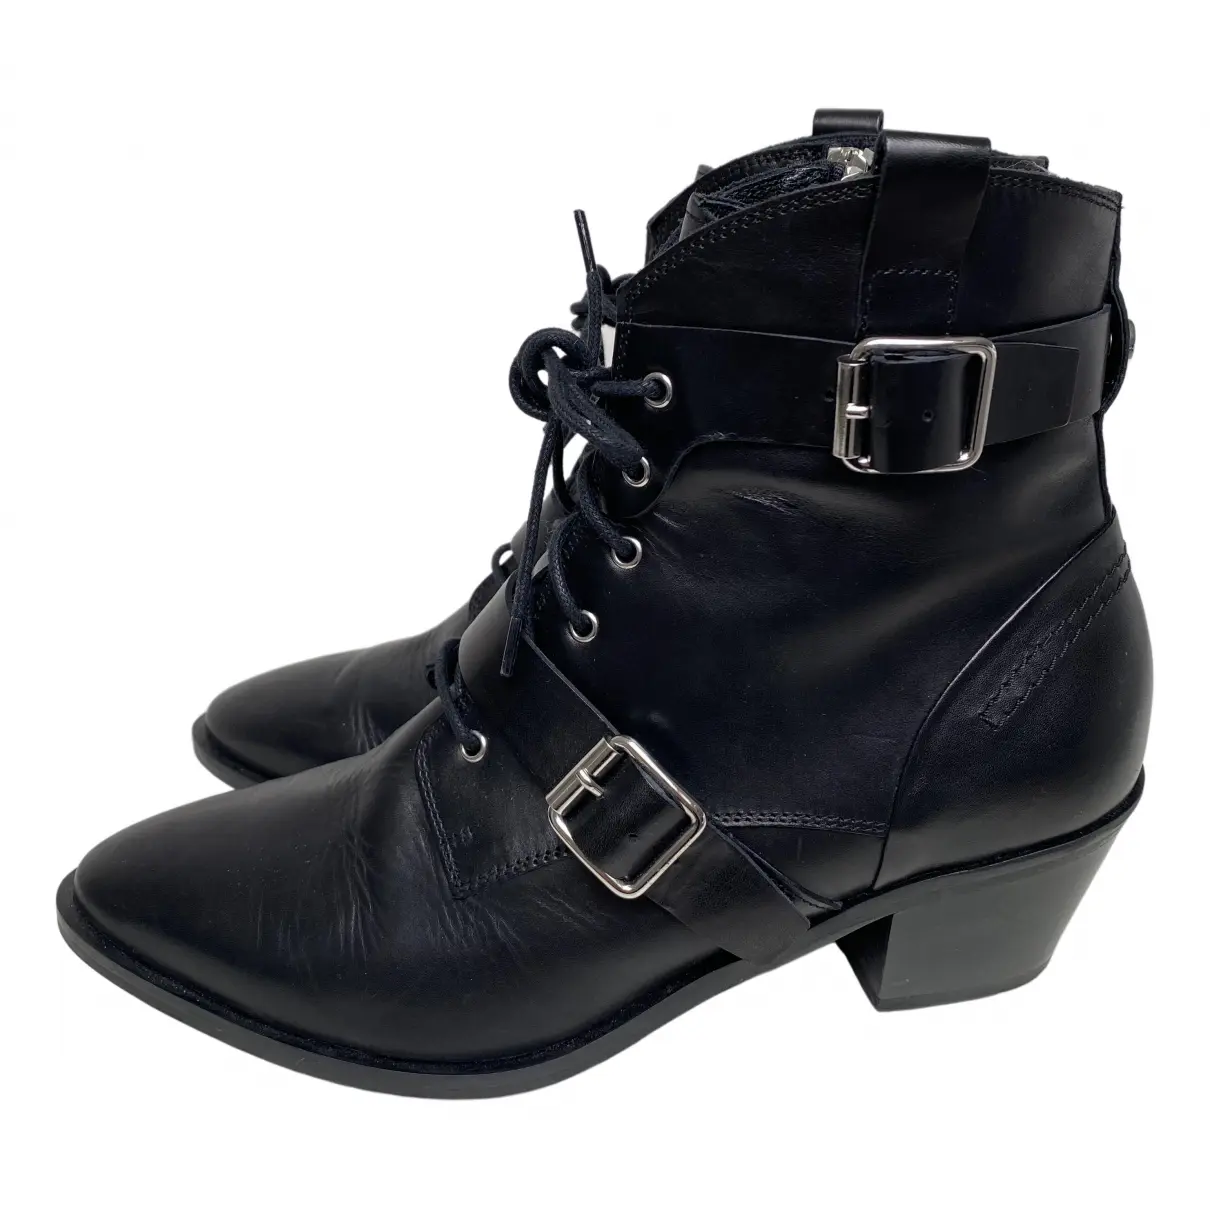 Leather biker boots Russell & Bromley